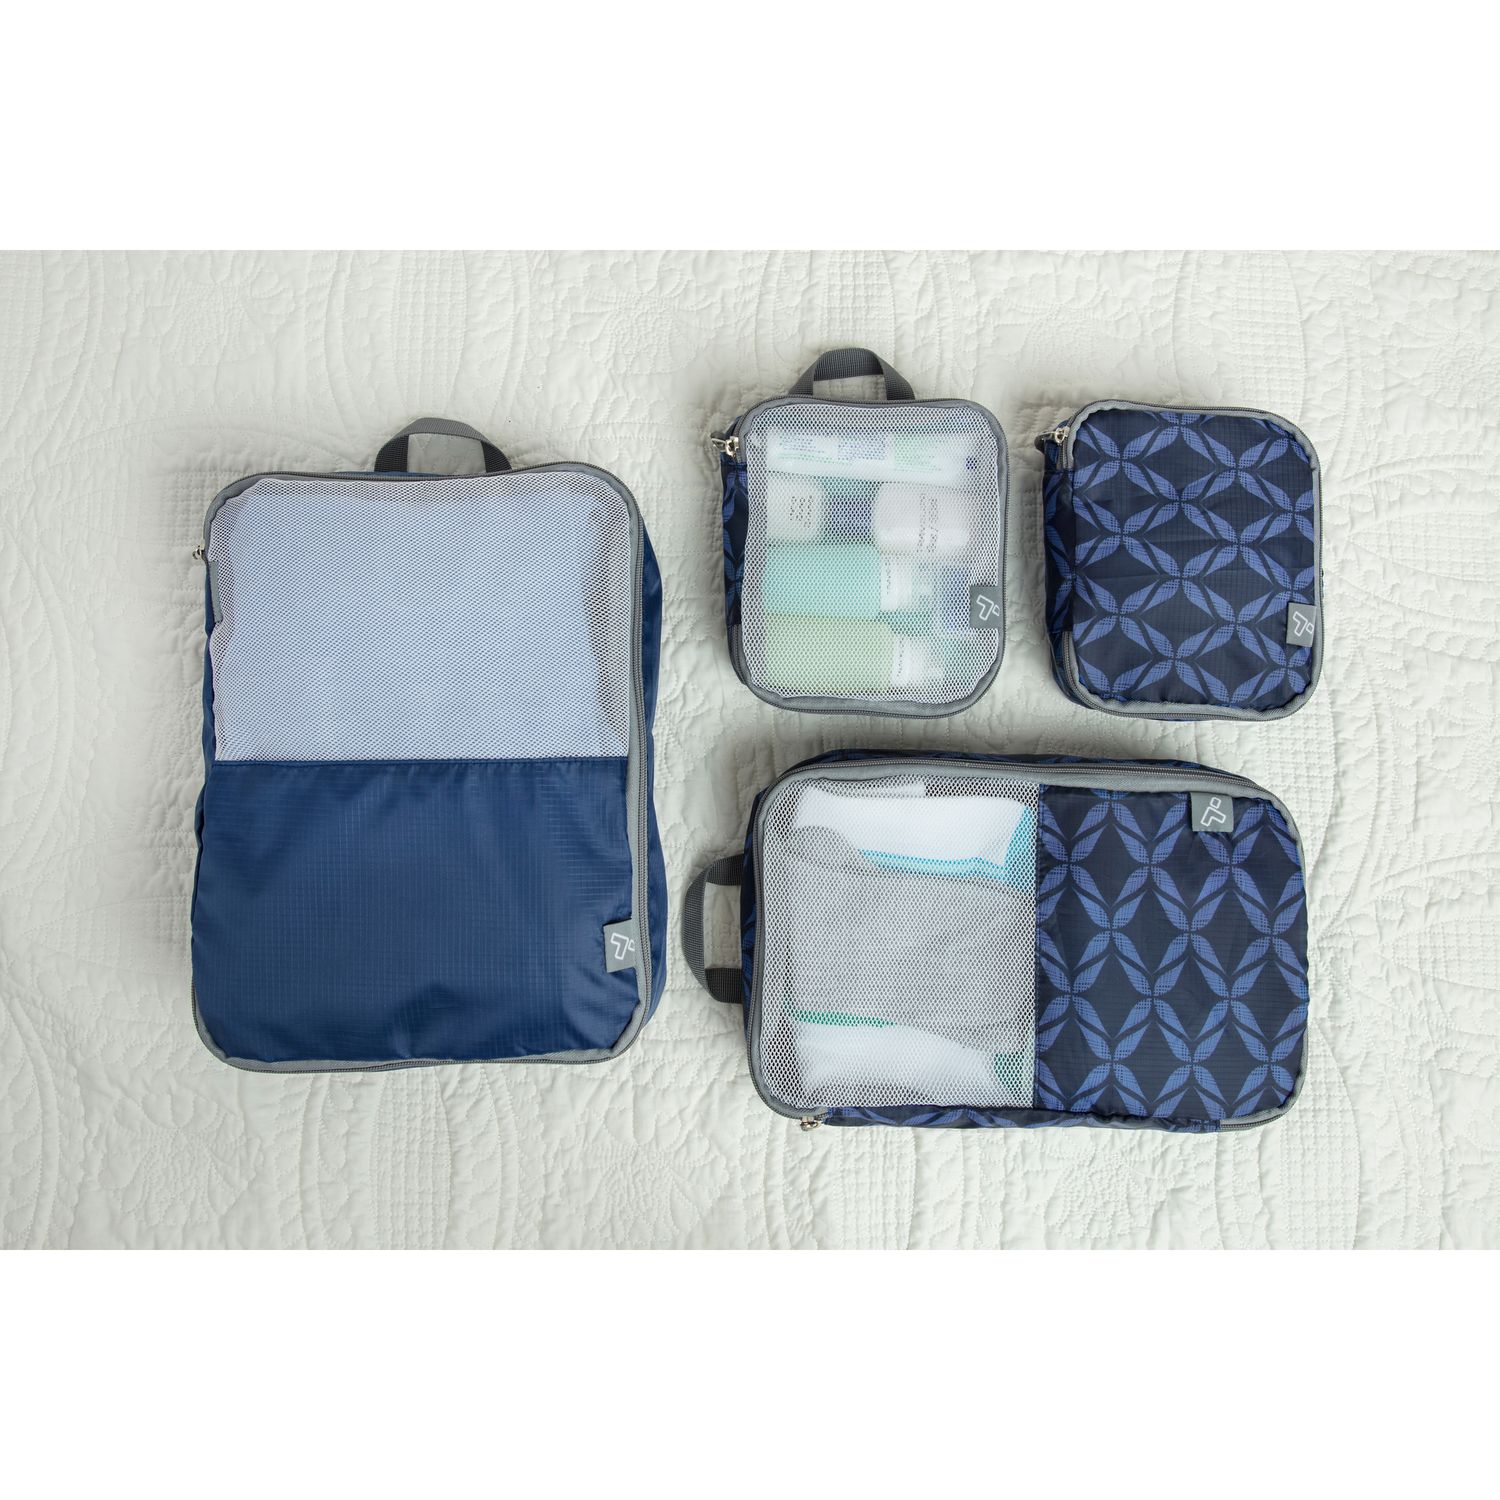 Packing cubes keep your clothes organized in a suitcase.